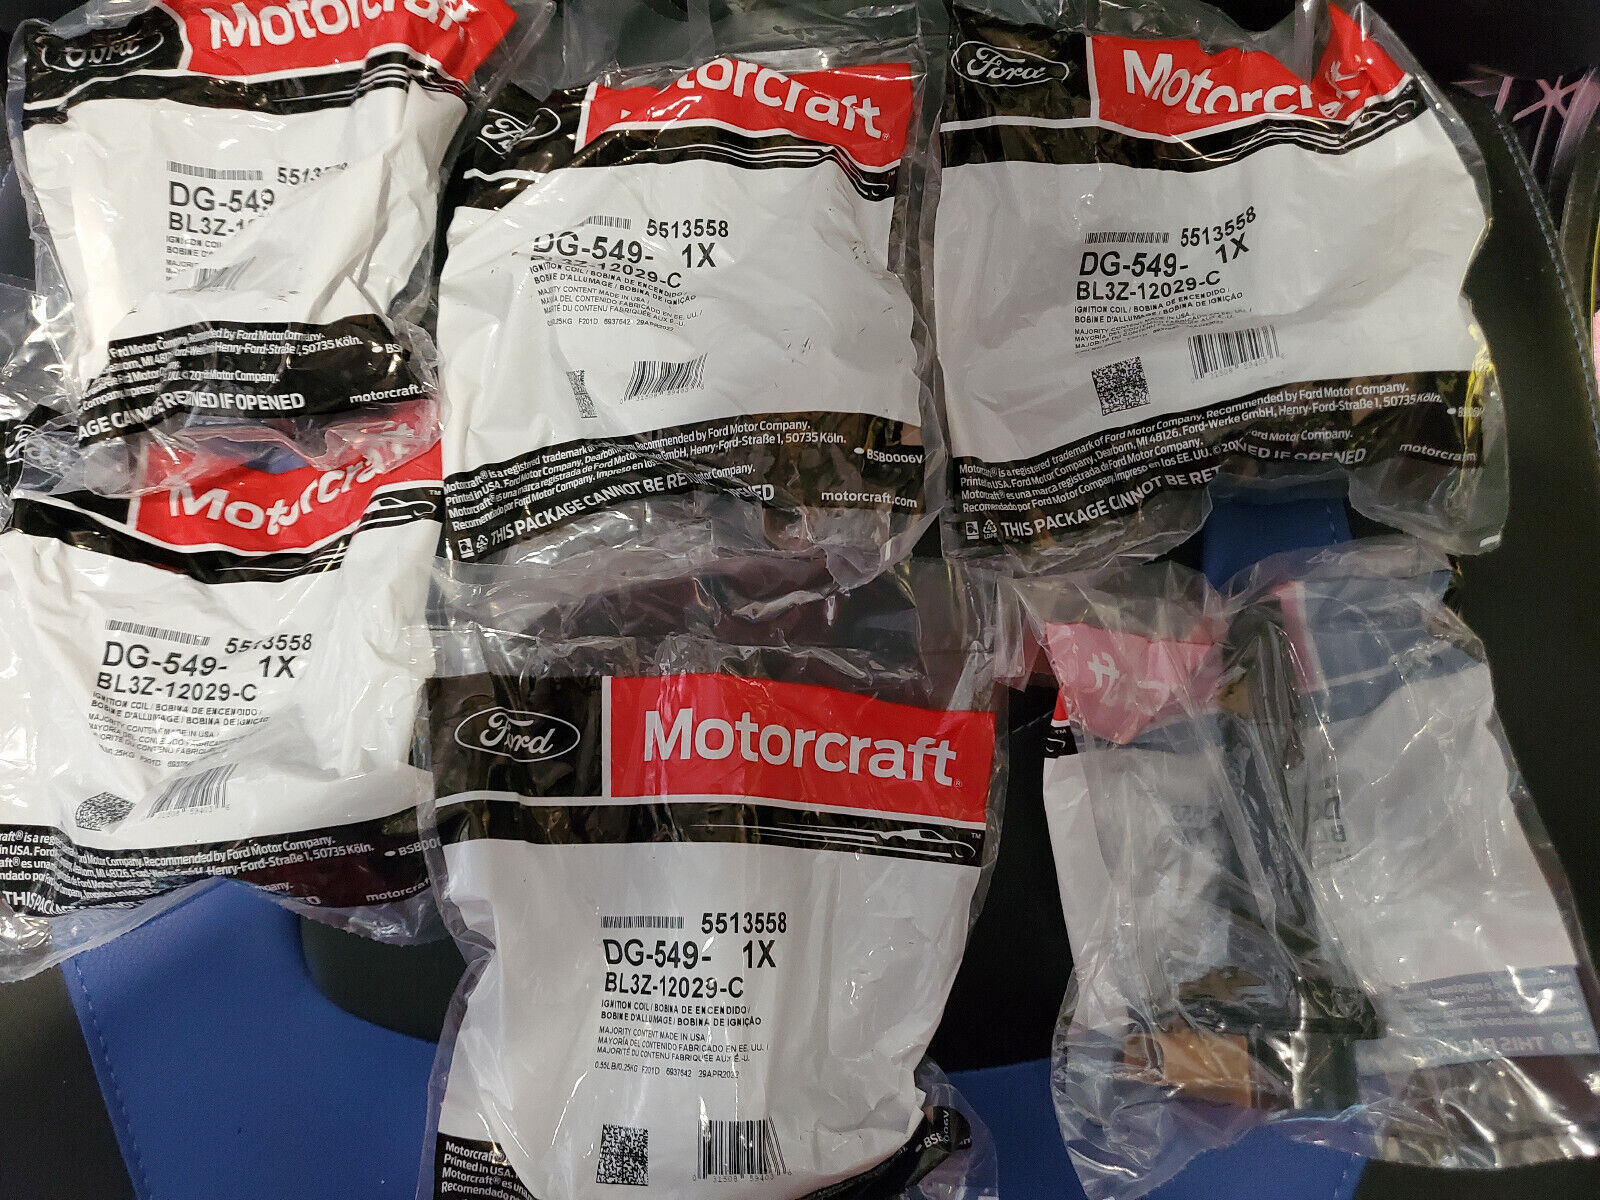  6/DG549 BRAND NEW MOTORCRAFT COILS OEM  NOT FAKE UF646 or UNBRANDED LIKE OTHERS